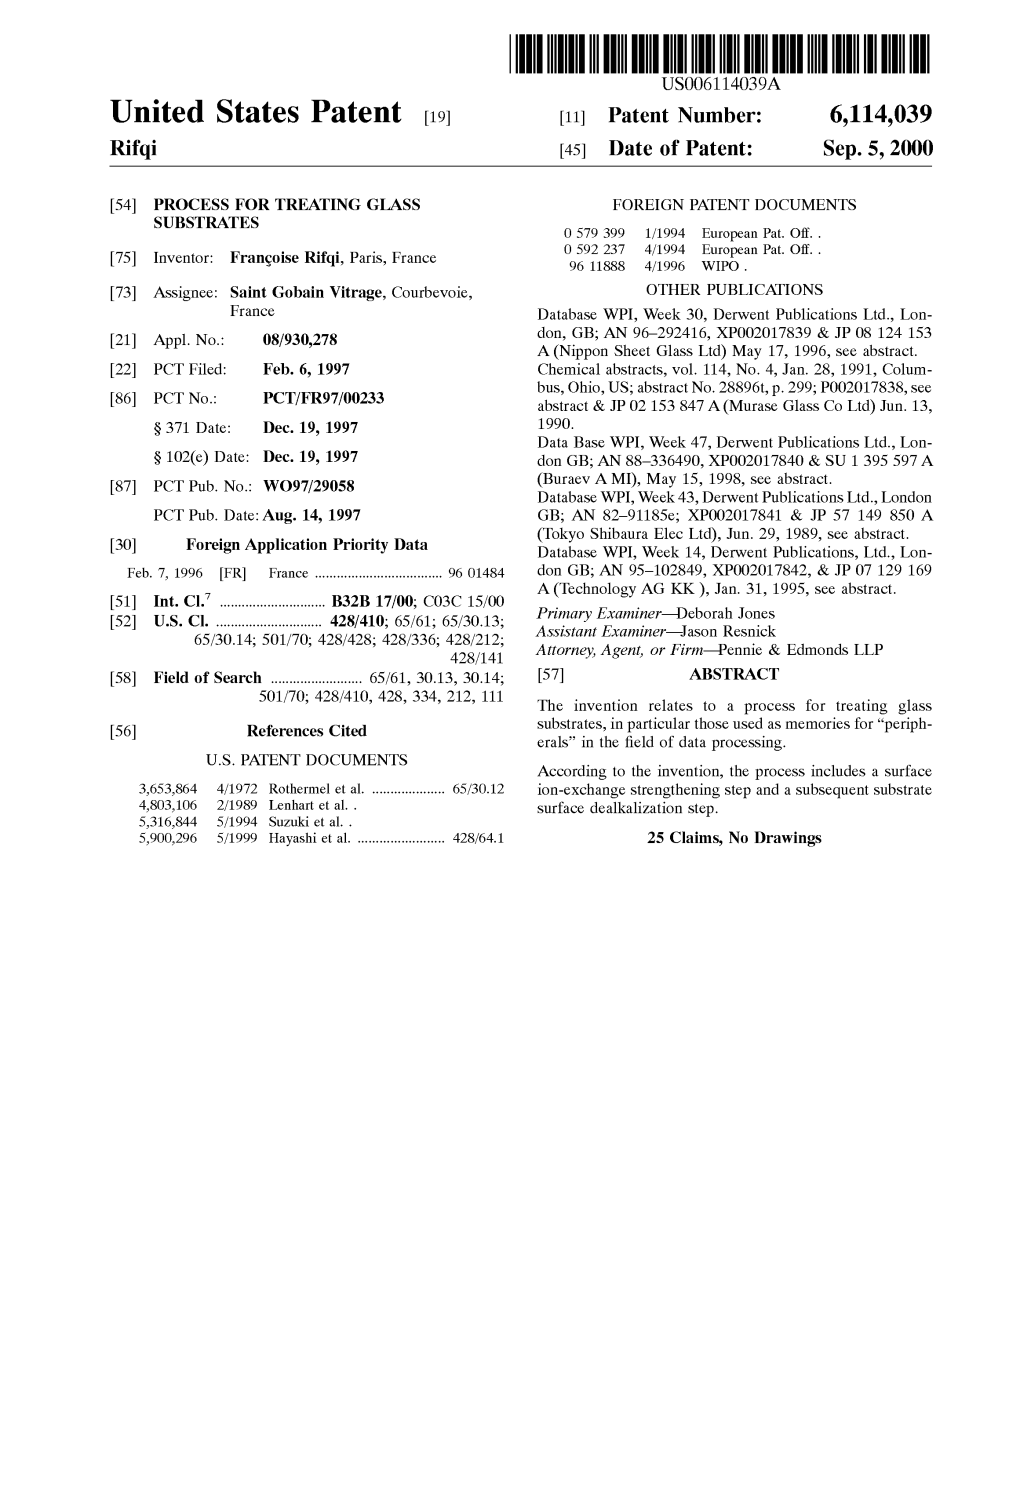 United States Patent (19) 11 Patent Number: 6,114,039 Rifqi (45) Date of Patent: Sep